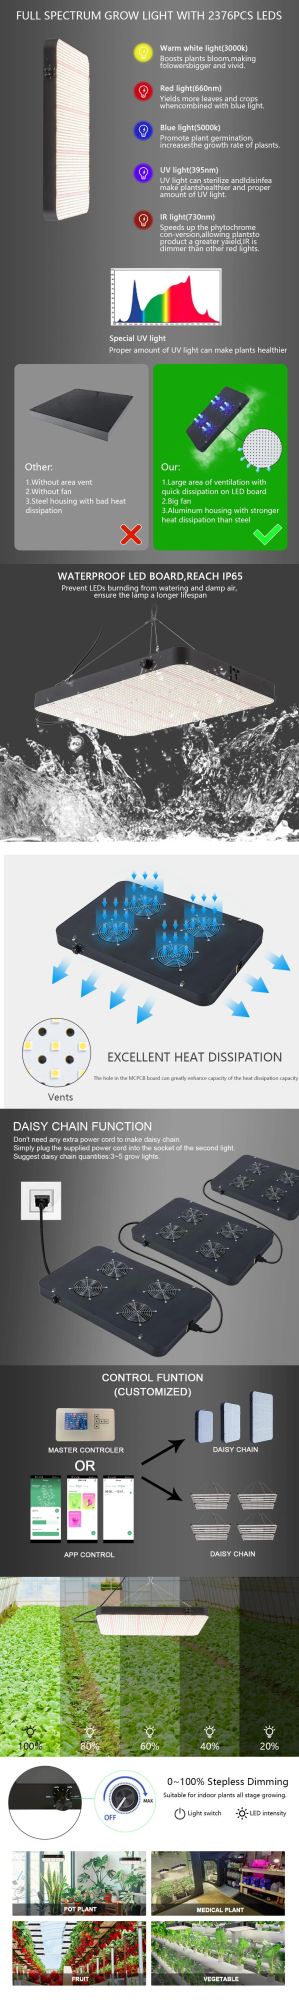 Wholesale 600W Full Spectrum Hydroponic Waterproof Daisy Chain Function 0-100% Dimmable High Power Indoor Plants LED Grow Lighting with CE, FCC, RoHS